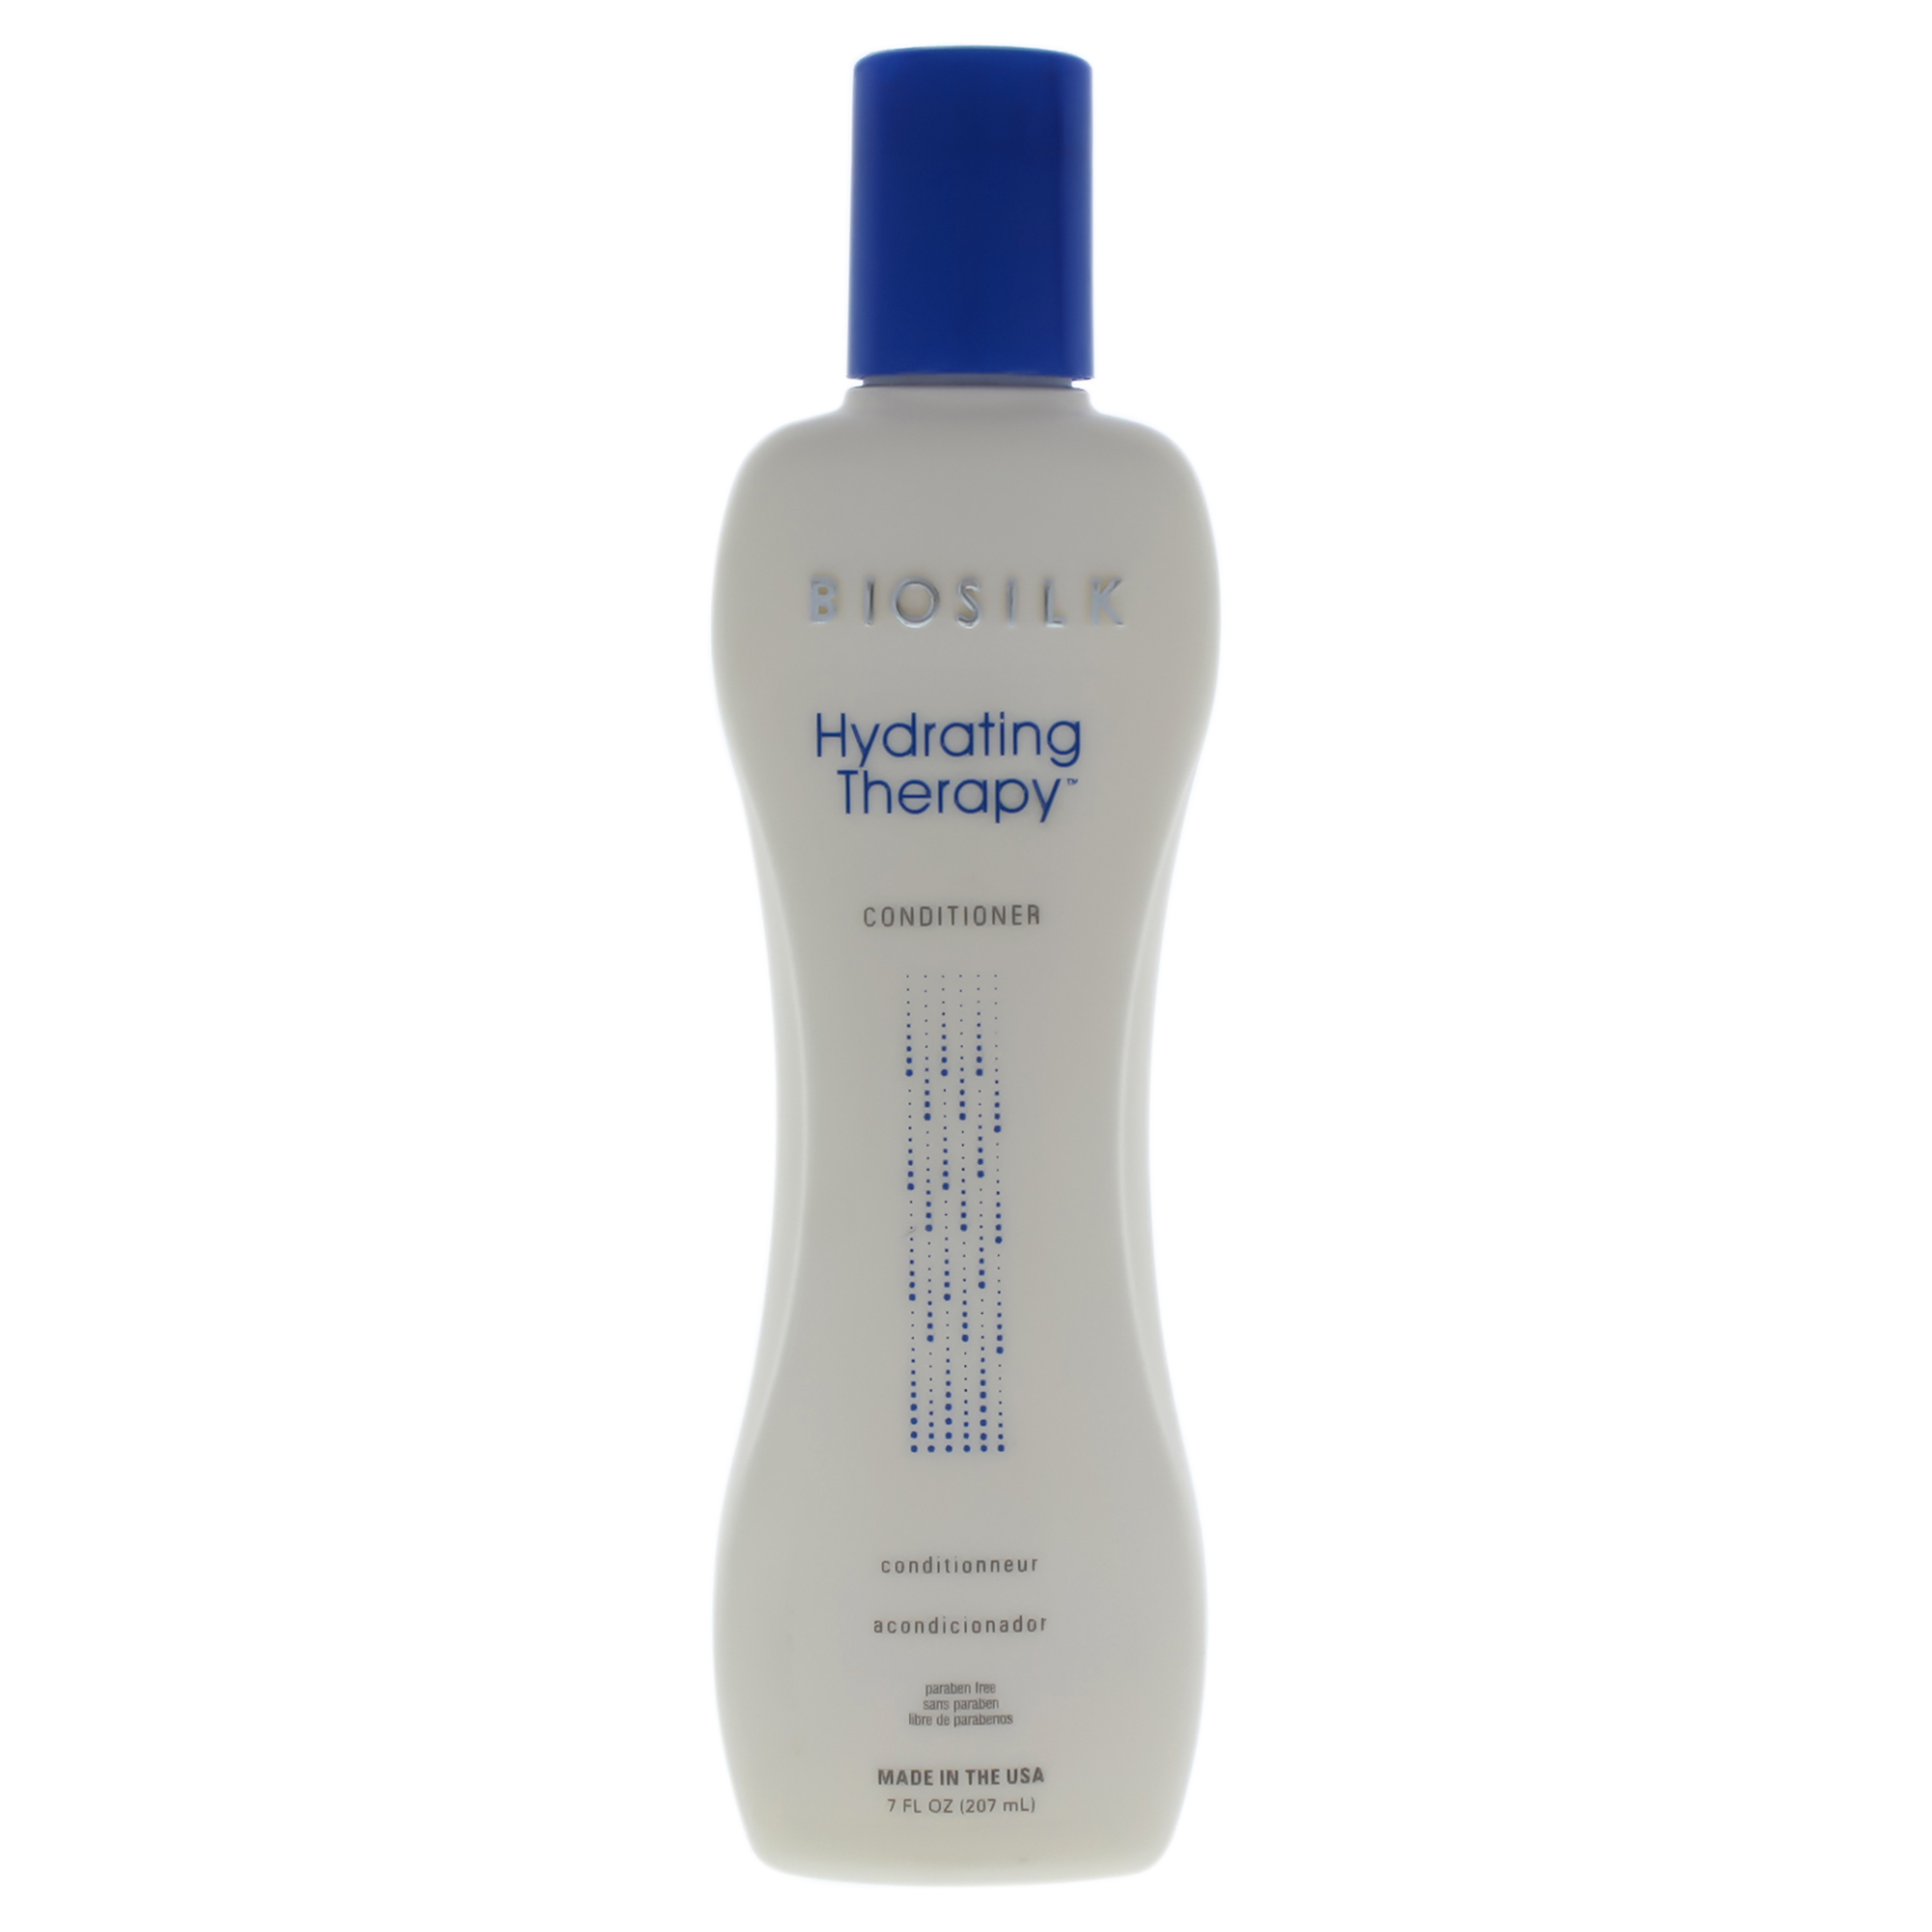 Hydrating Therapy Conditioner by Biosilk for Unisex - 7 oz Conditioner